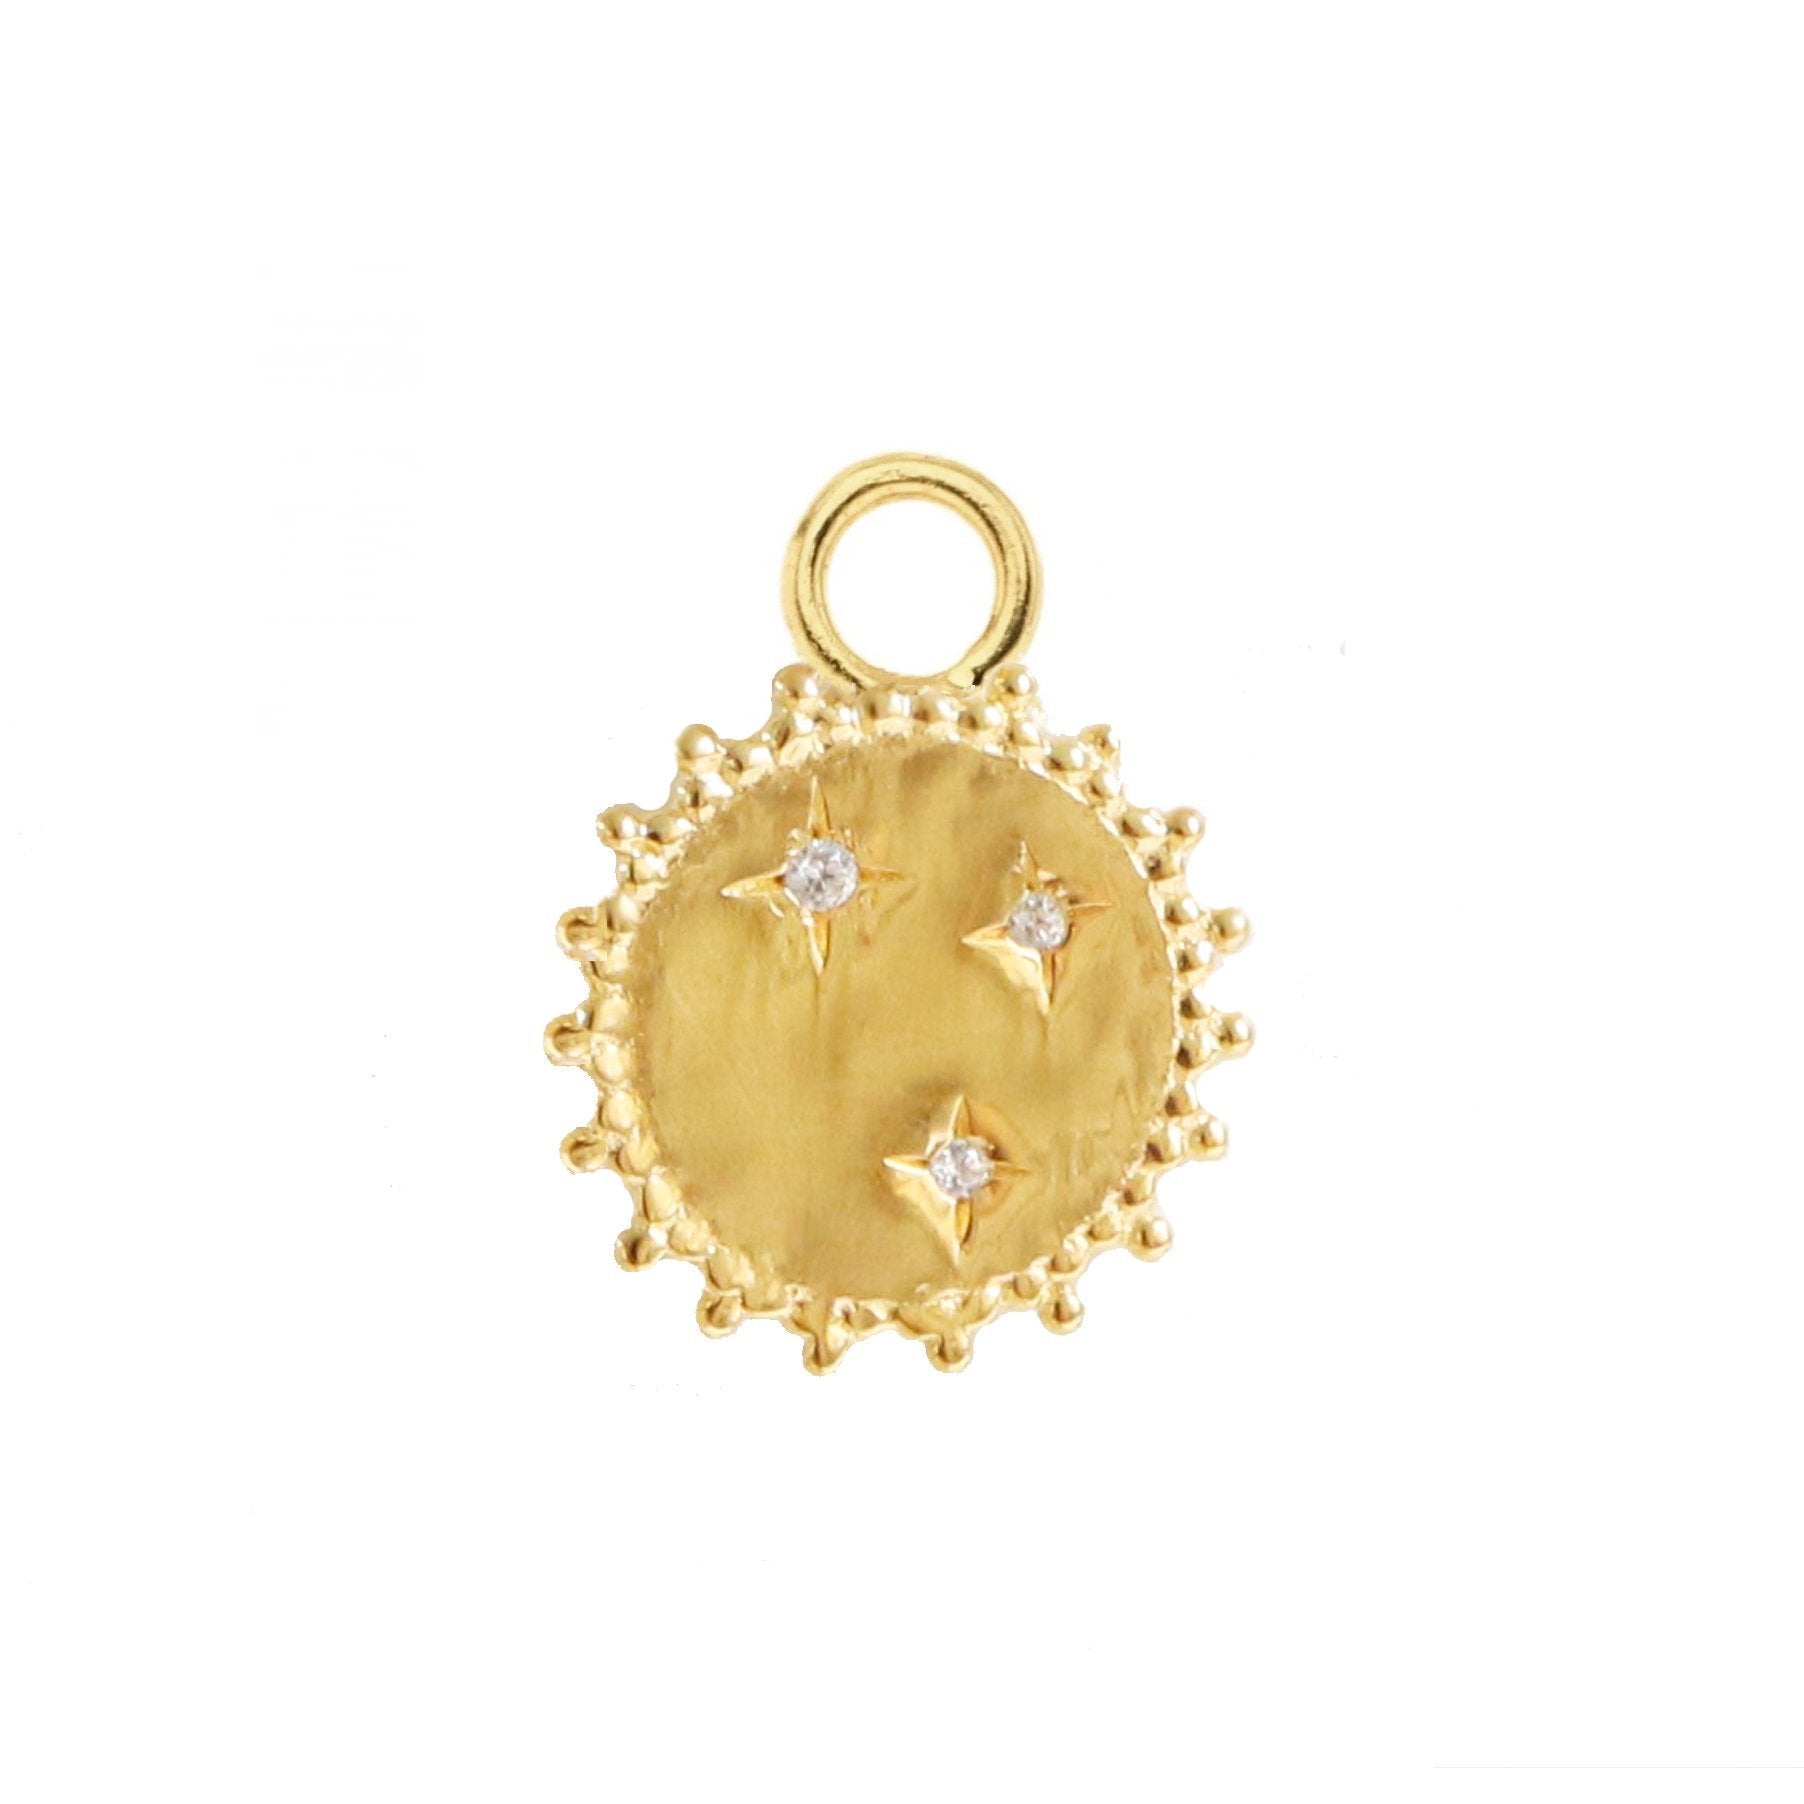 BELIEVE SOLEIL STAR ICON - CUBIC ZIRCONIA & GOLD - SO PRETTY CARA COTTER